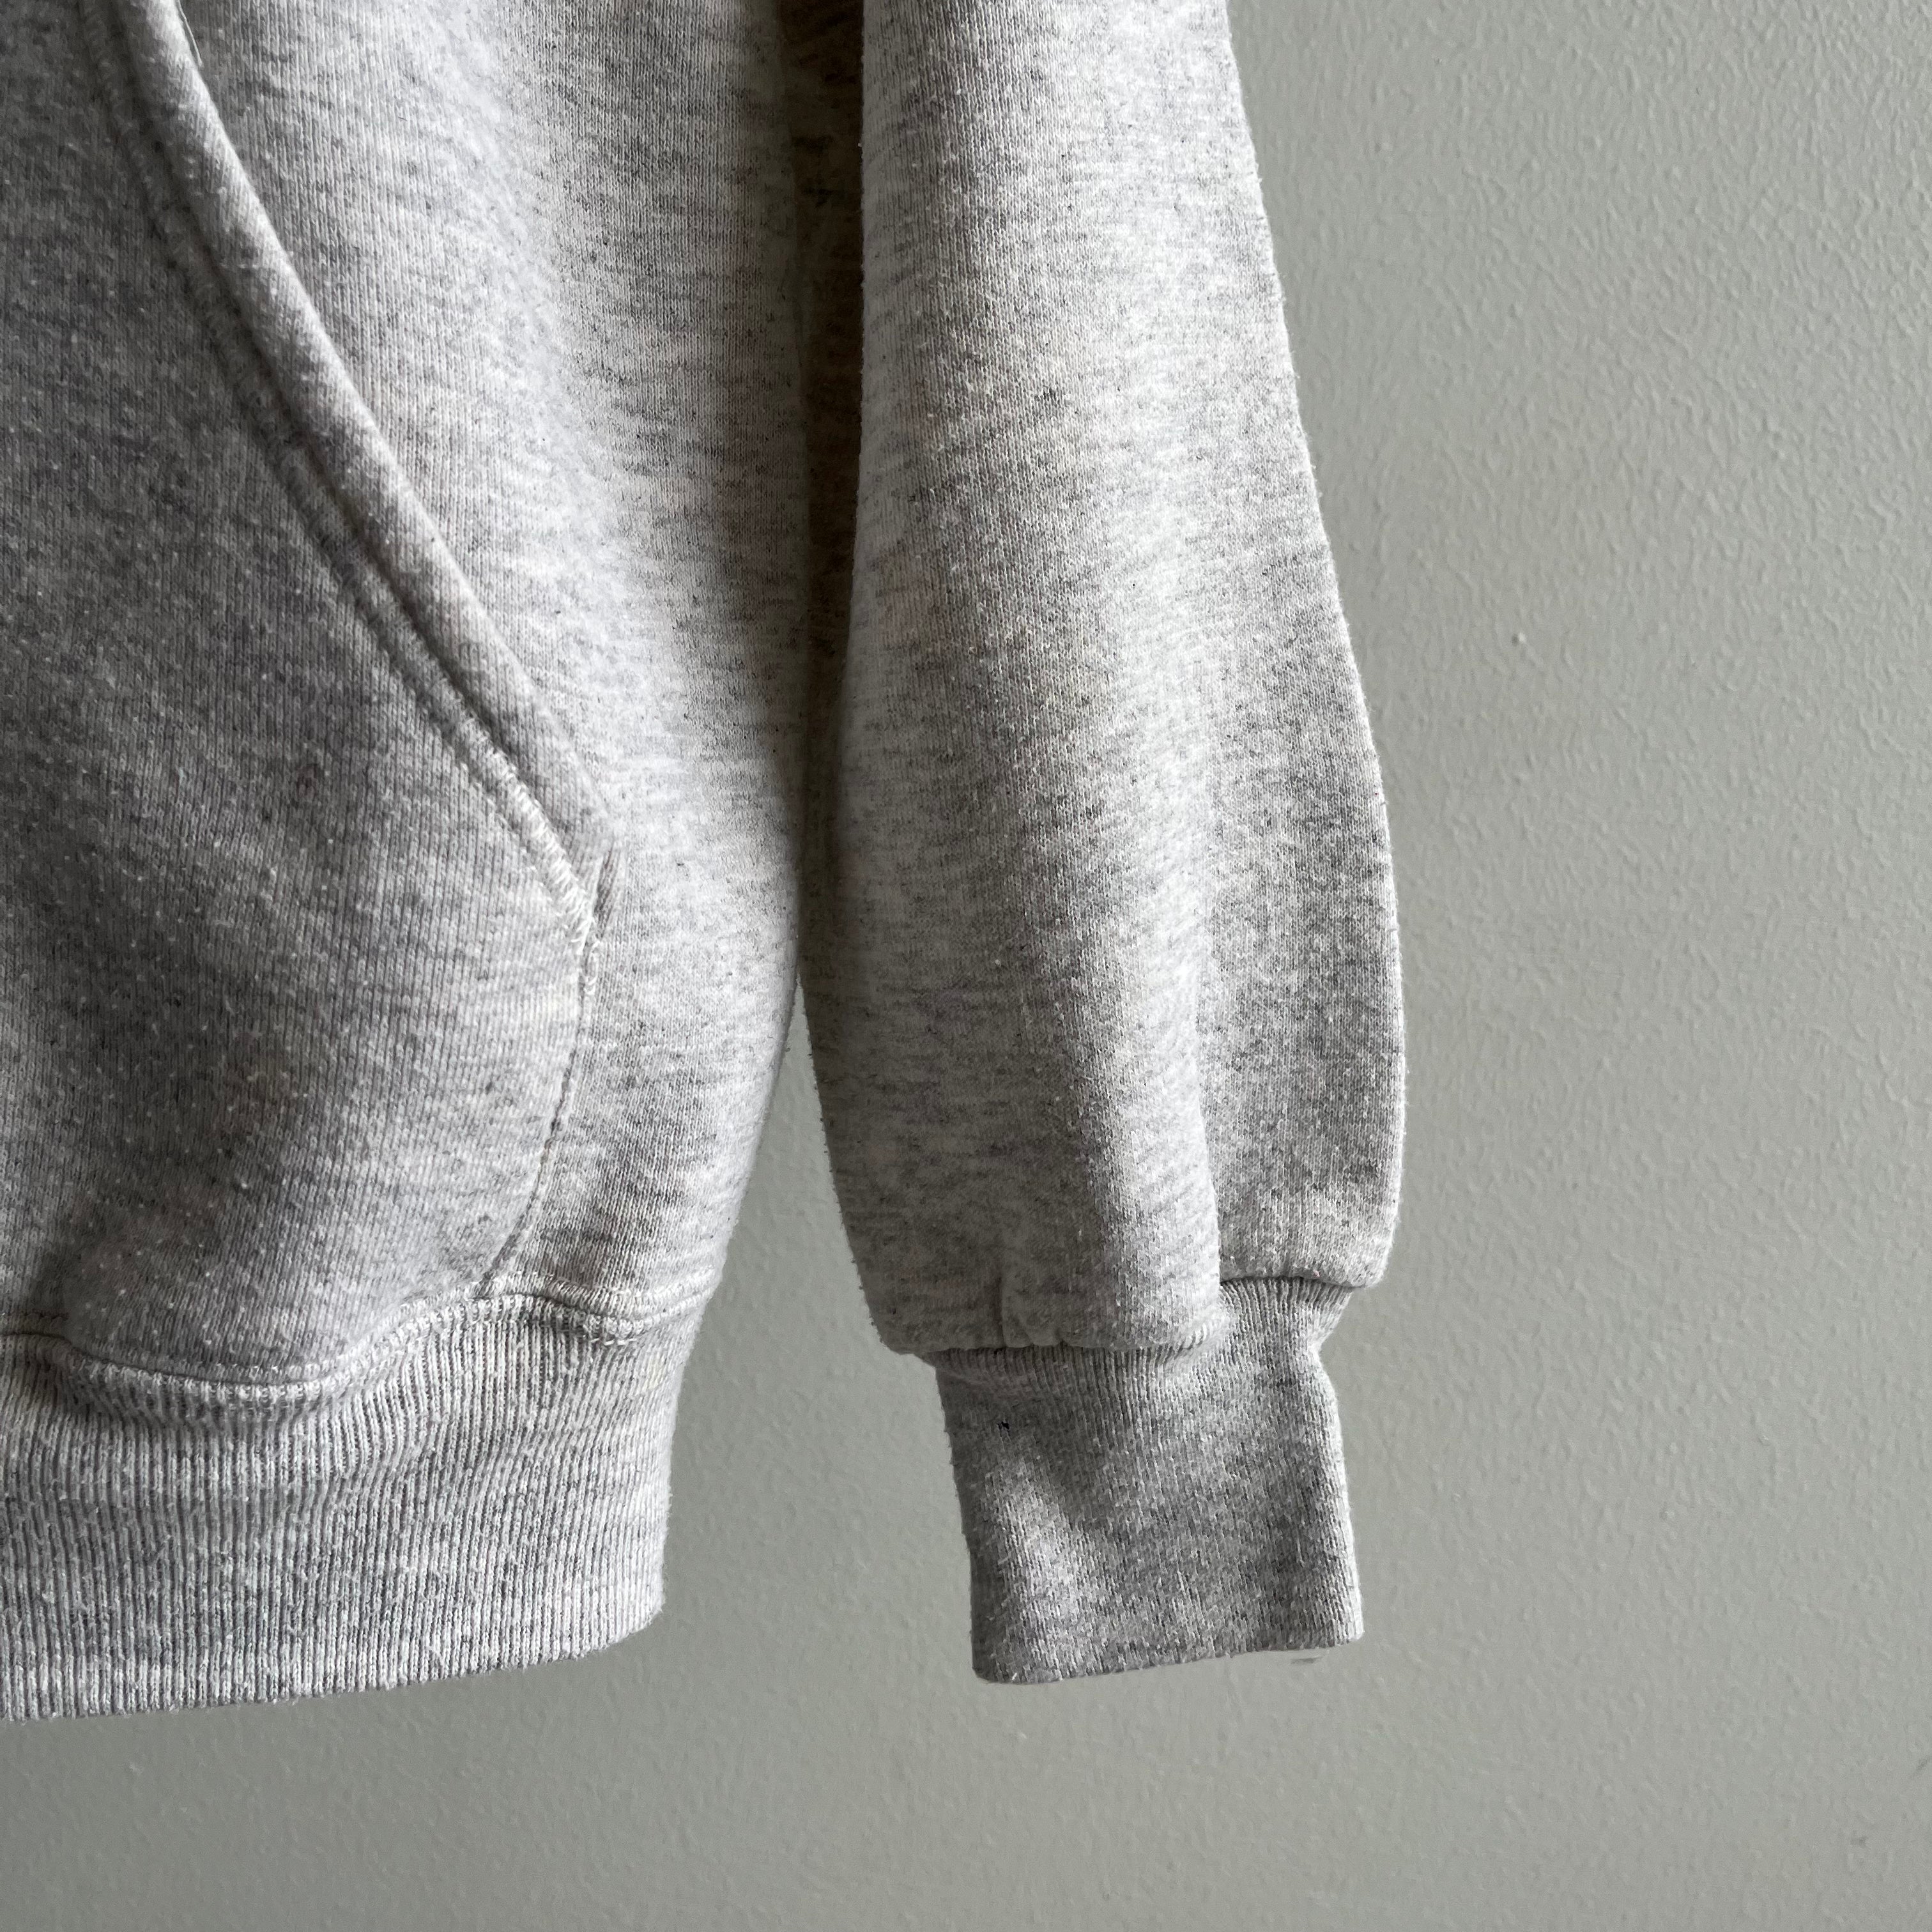 1980s Cut Neck. Light Gray Pull Over Hoodie by Jerzees